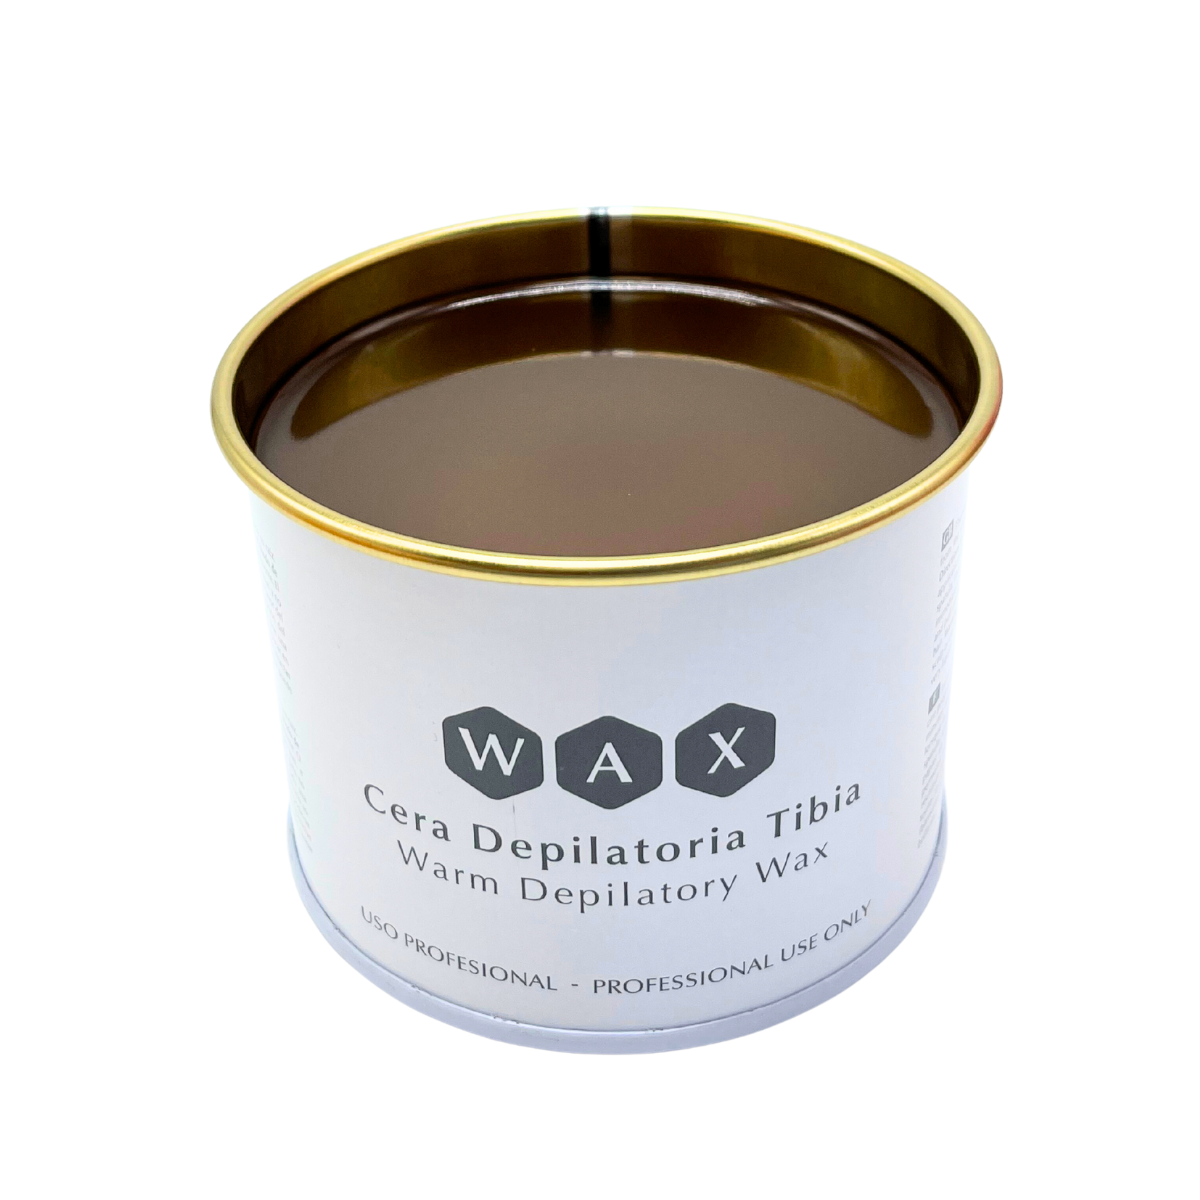 Depilcompany Soft Wax Natural Can - 14 oz. (2 Units Offer)